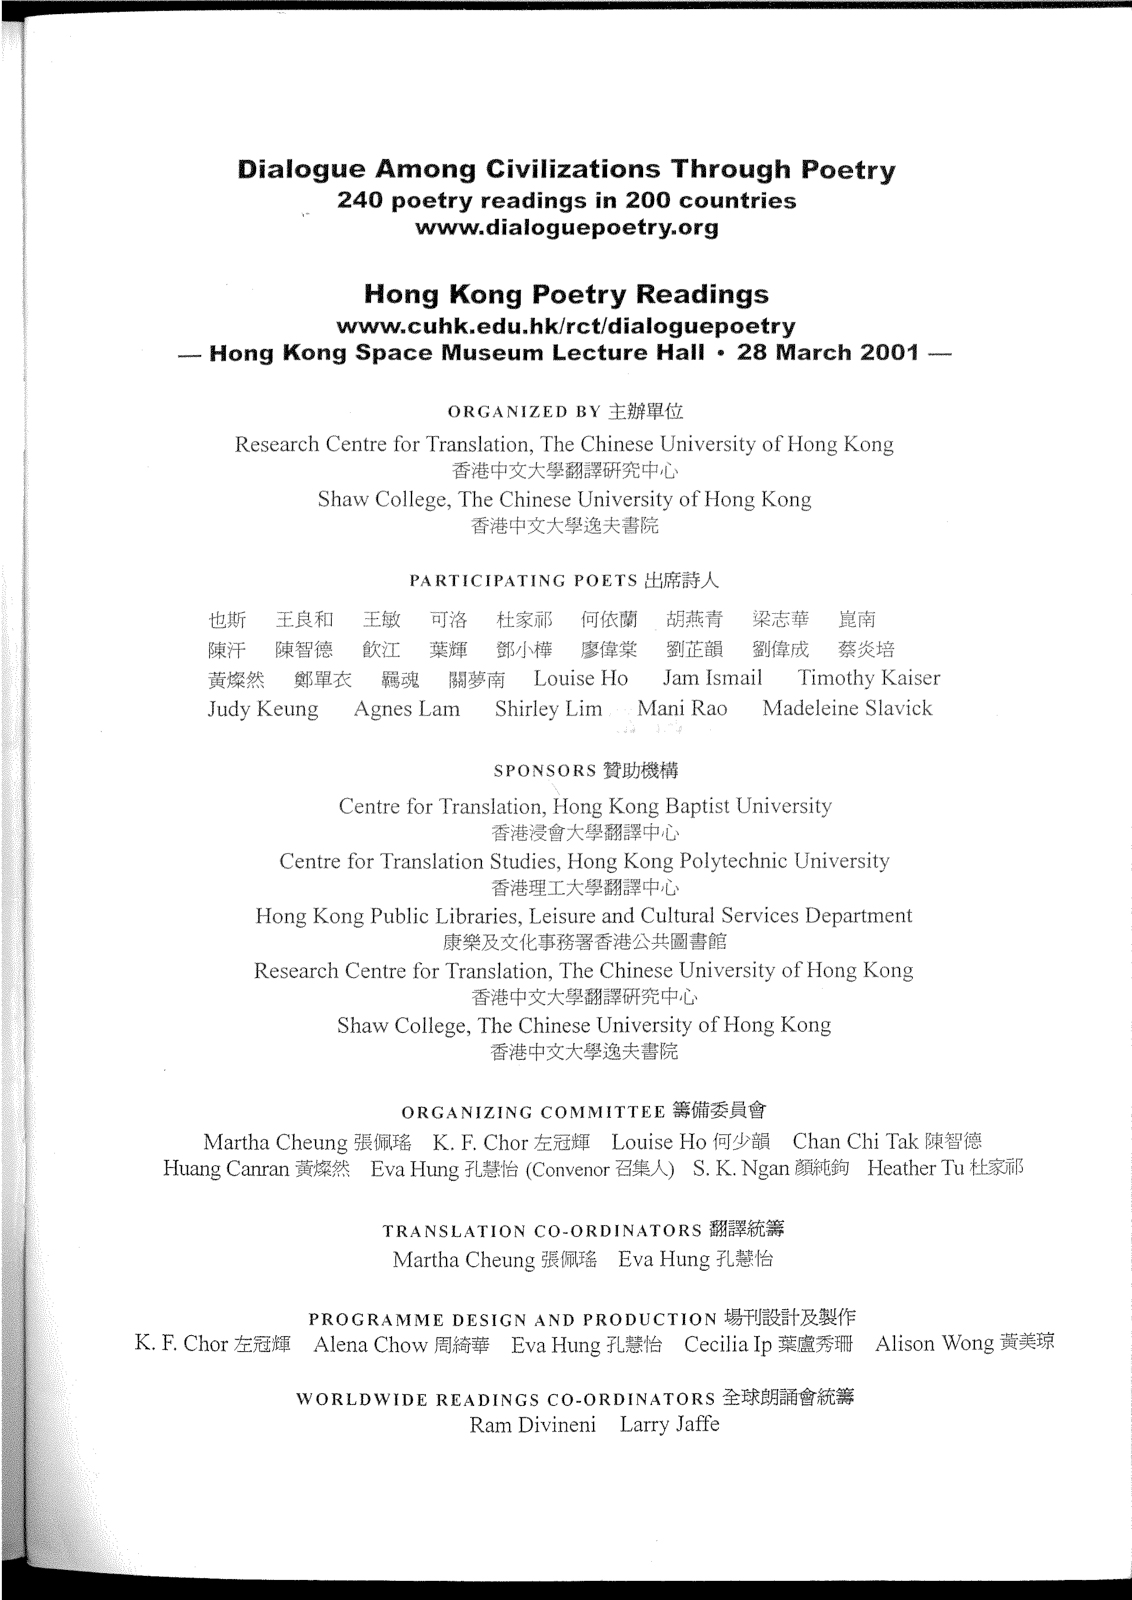 Dialogue Among Civilizations Through Poetry 240 poetry readings in 200 countries: Hong Kong Poetry Readings - Readings in 150 Cities around the World